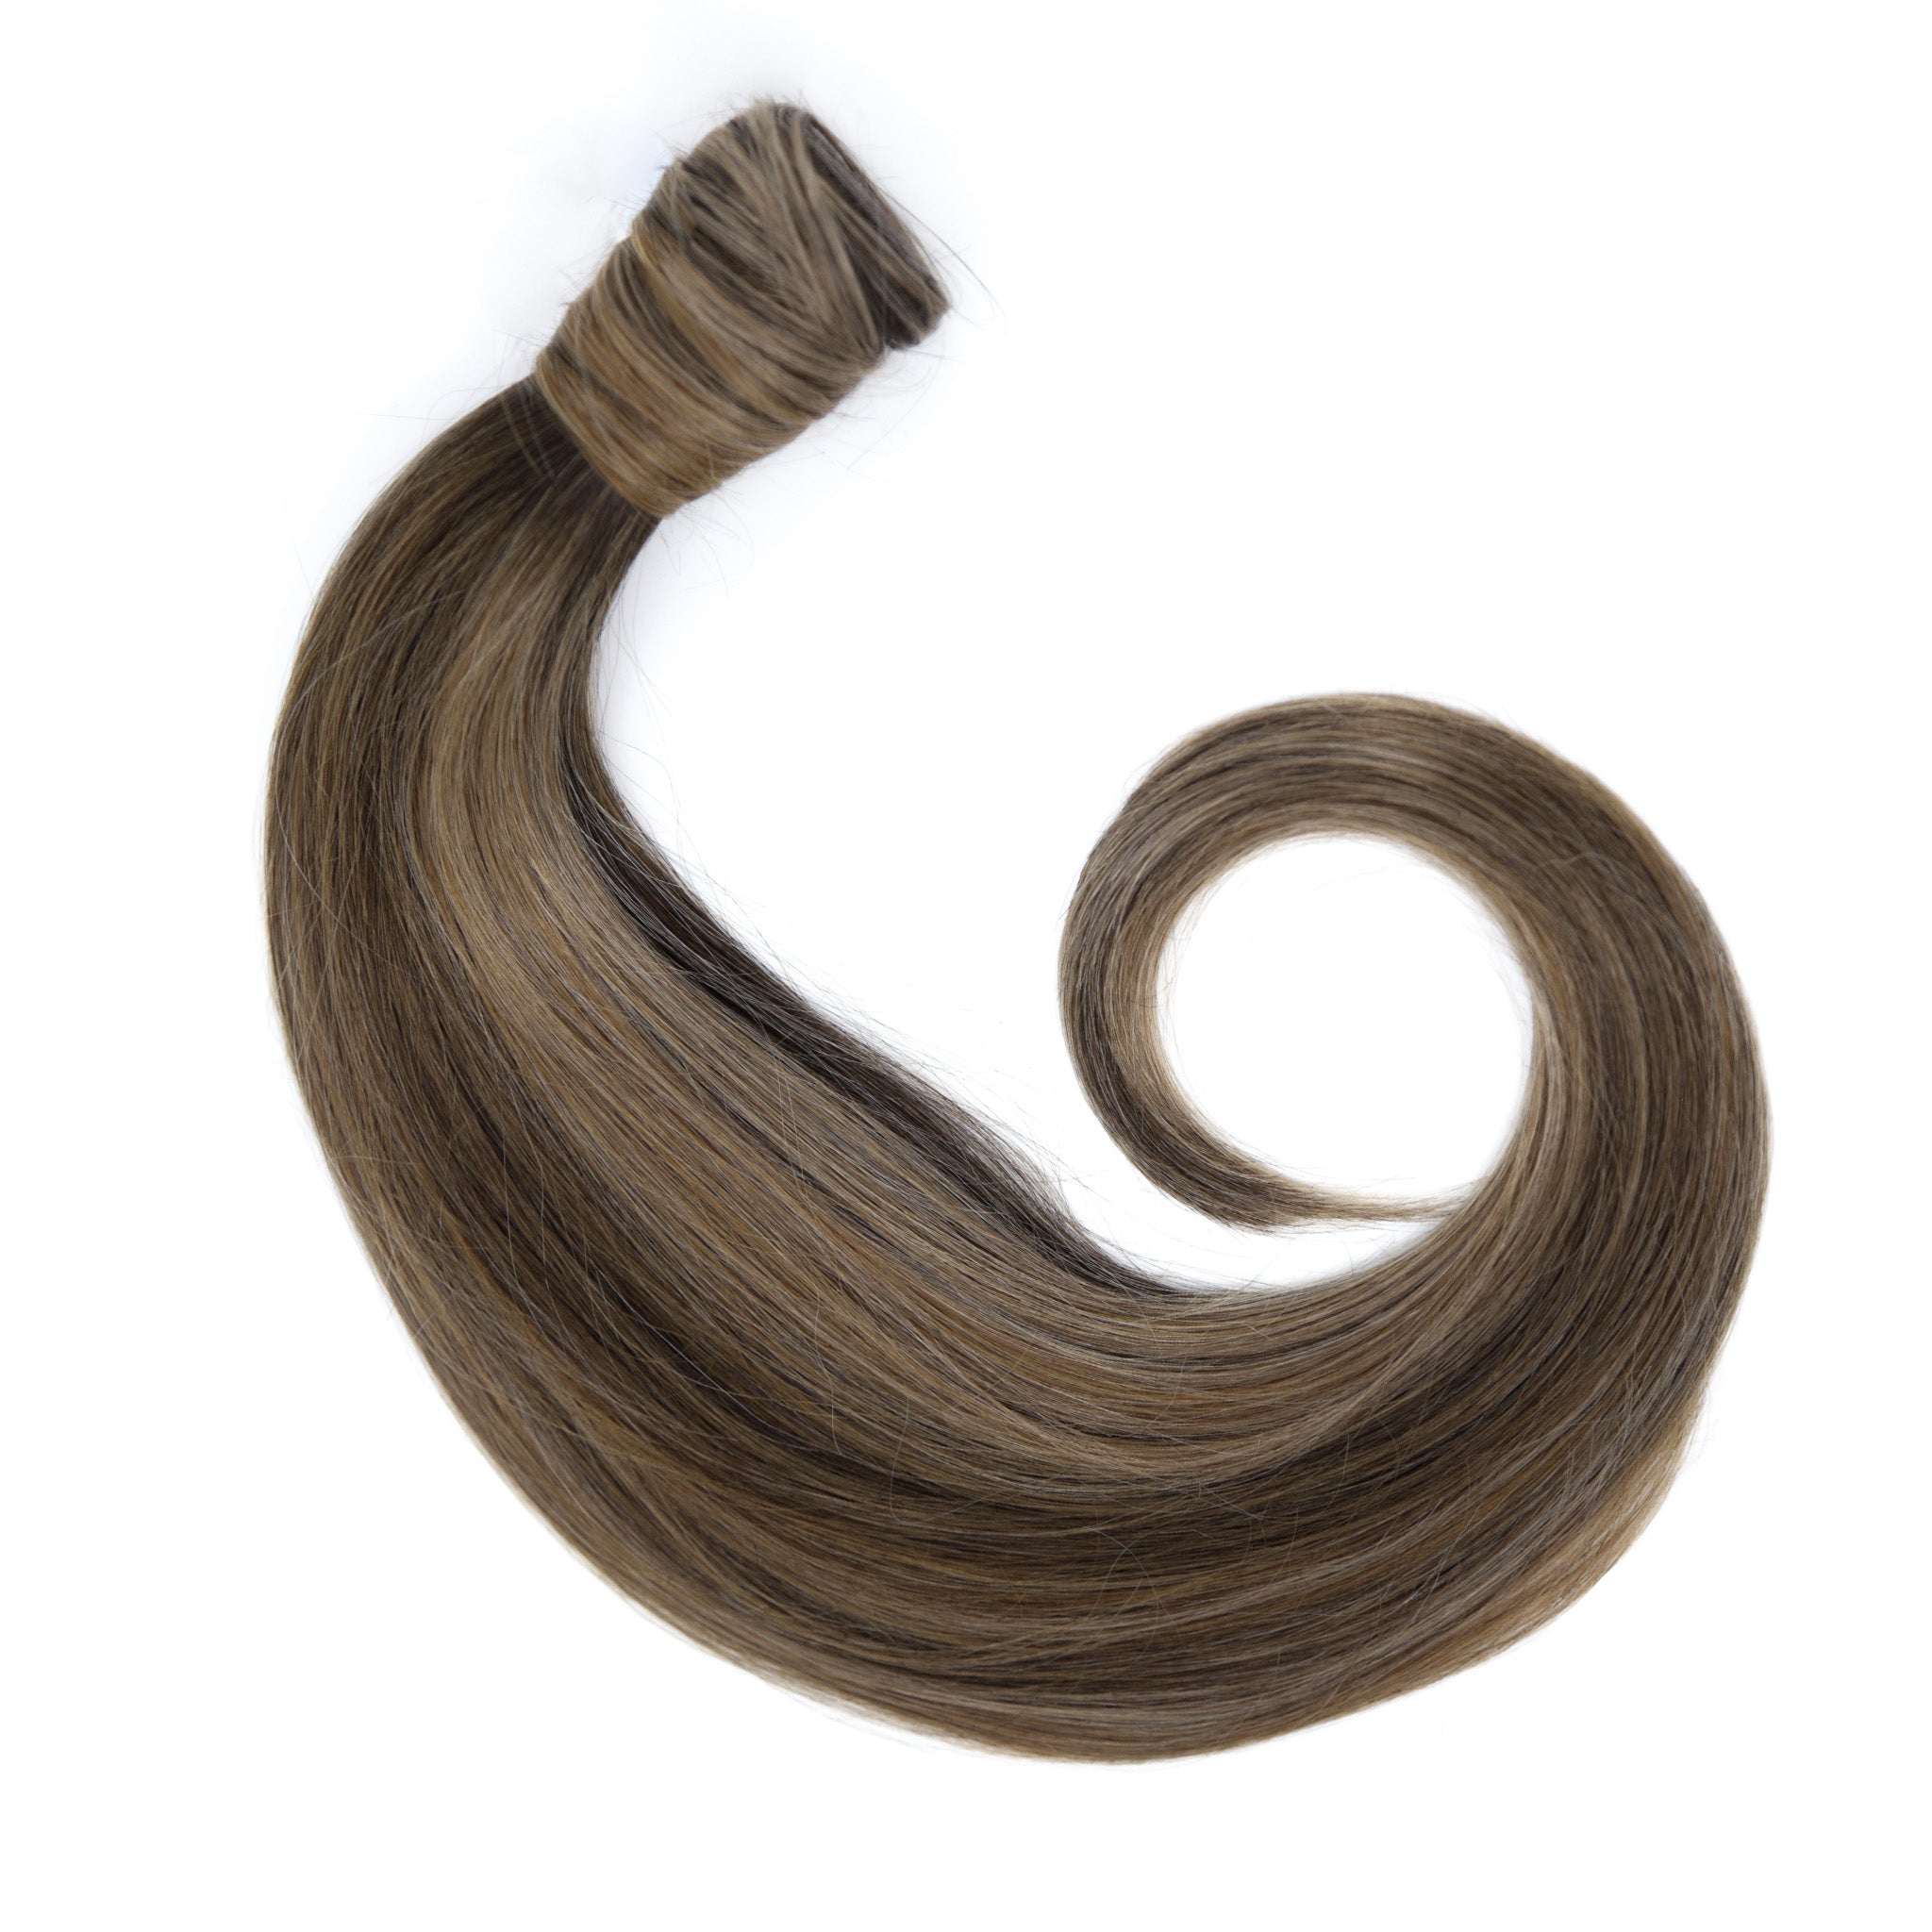 Pacific Balayage Ponytail Hair Extension